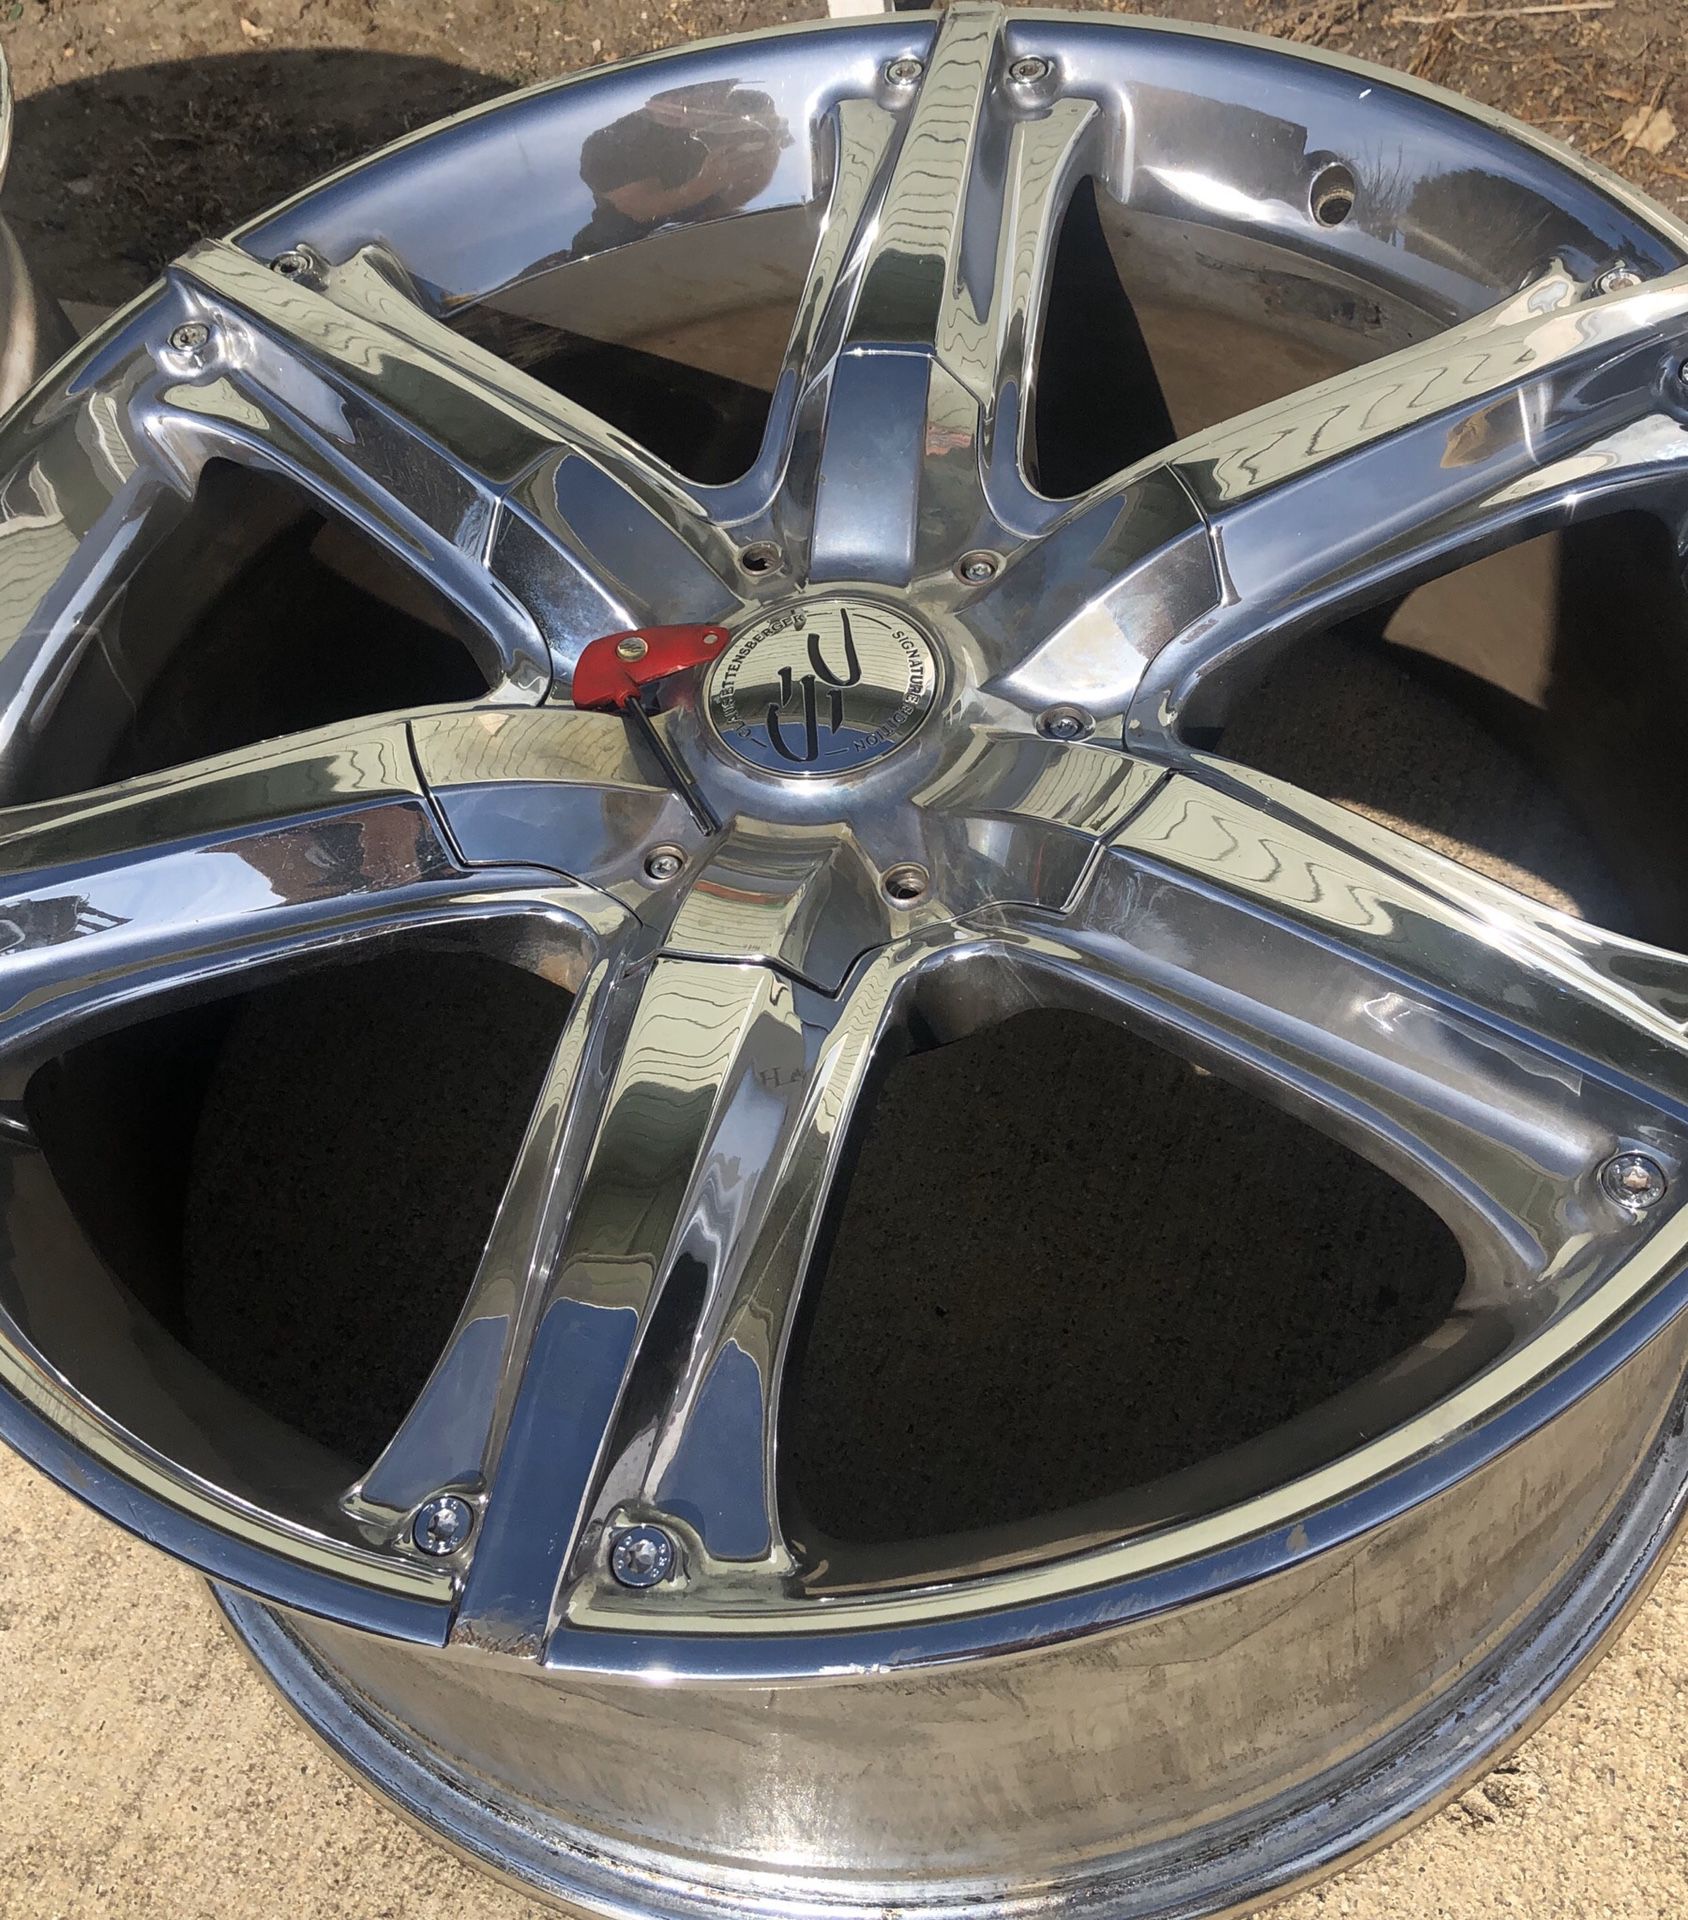 Rims with locking nuts and key 5x150 pattern